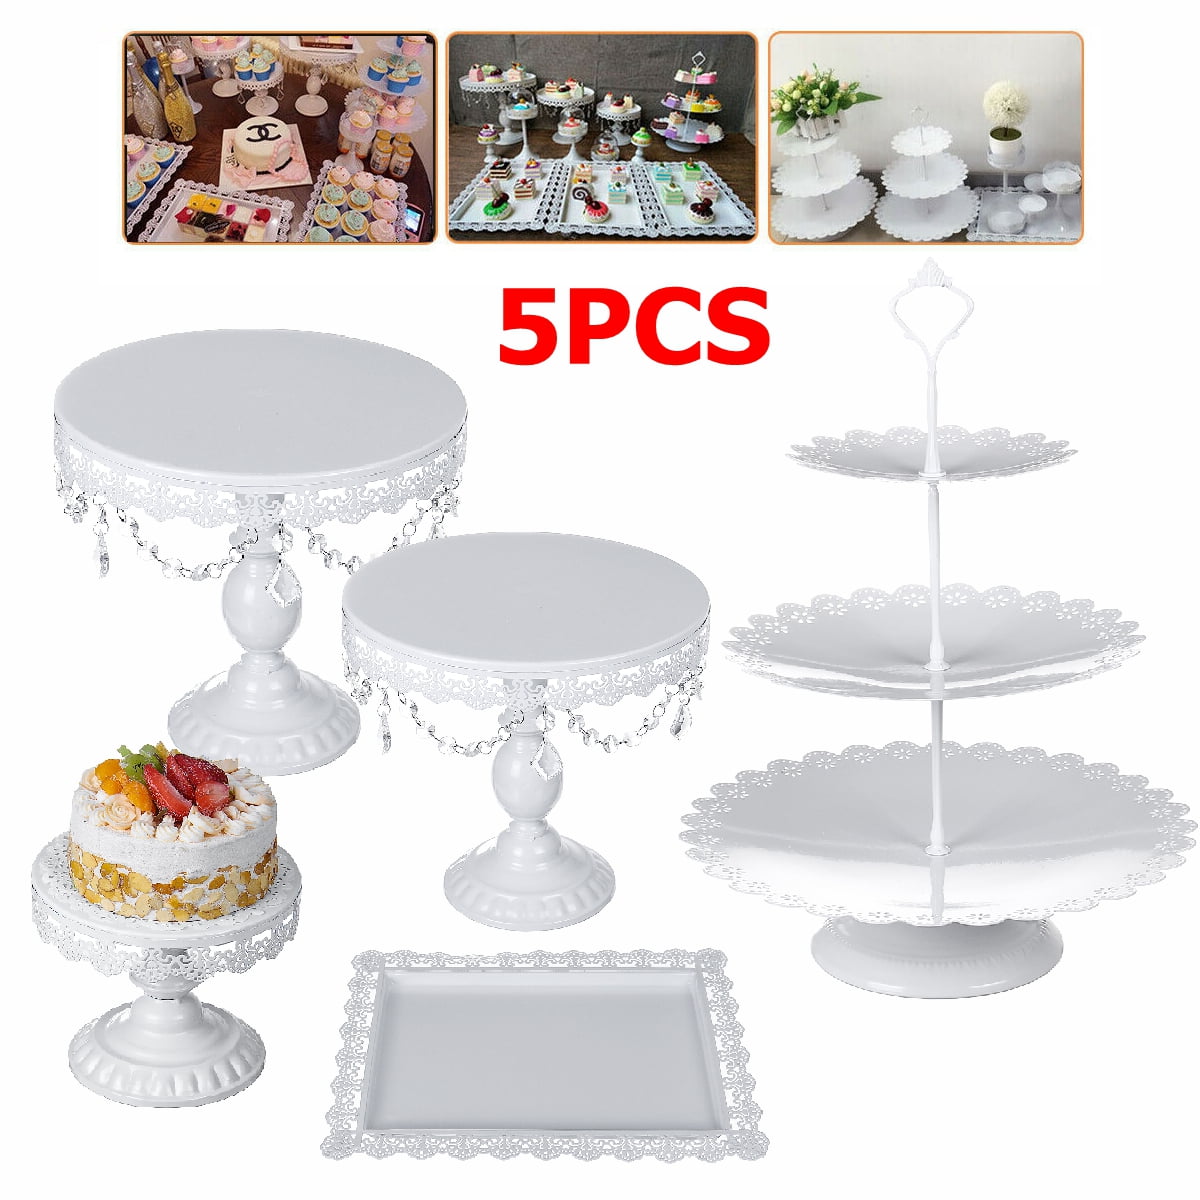 Metal Crystal Cake Holder Cupcake Stands with Pendants and Beads Cake Stand Dessert Wedding Birthday Dessert Cupcake Pedestal Display Cake Stands Silver, 1